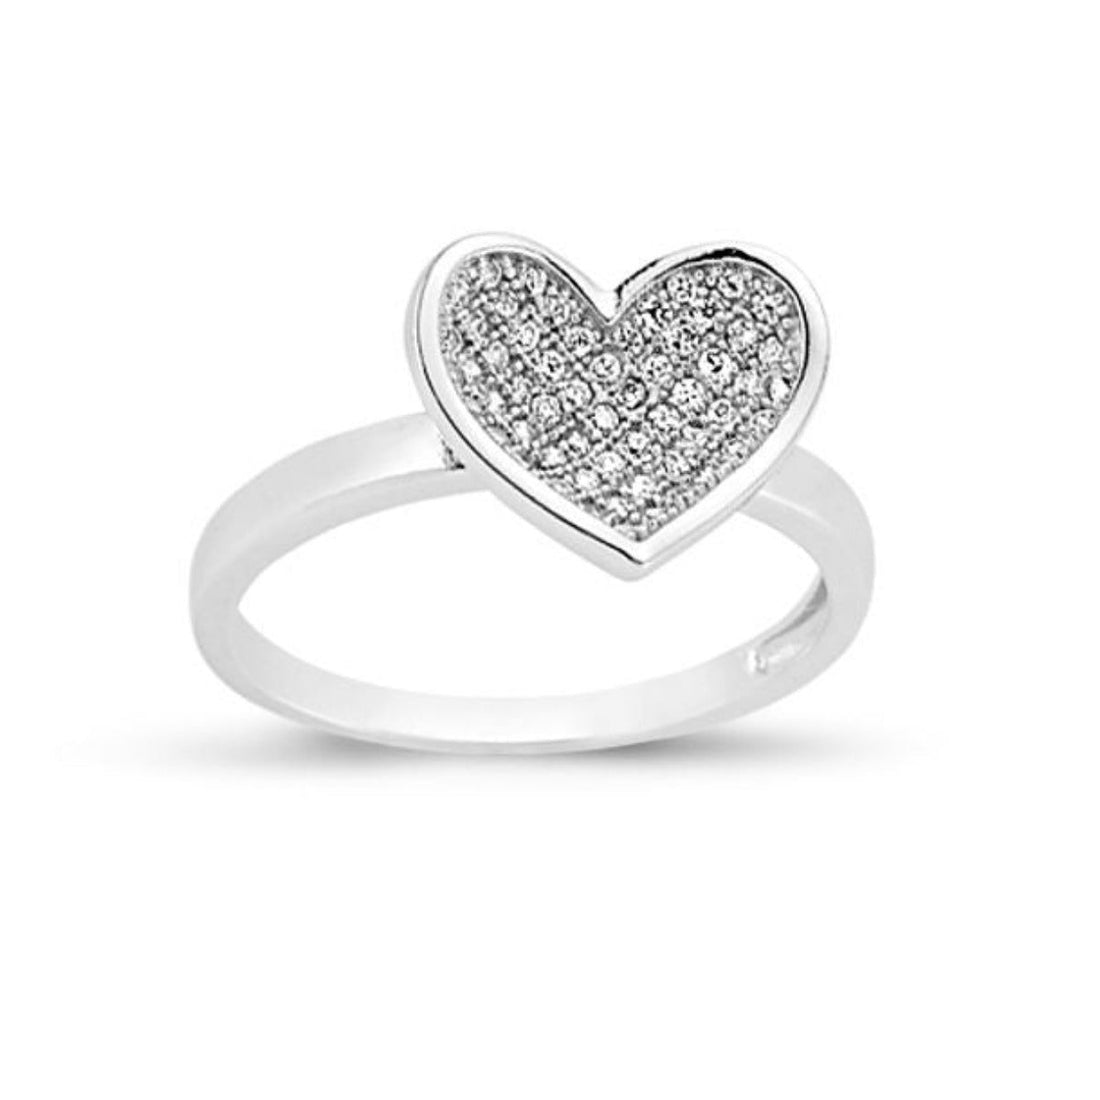 Pave Set Cubic Zirconia Love Heart Ring in Rhodium Plated Silver